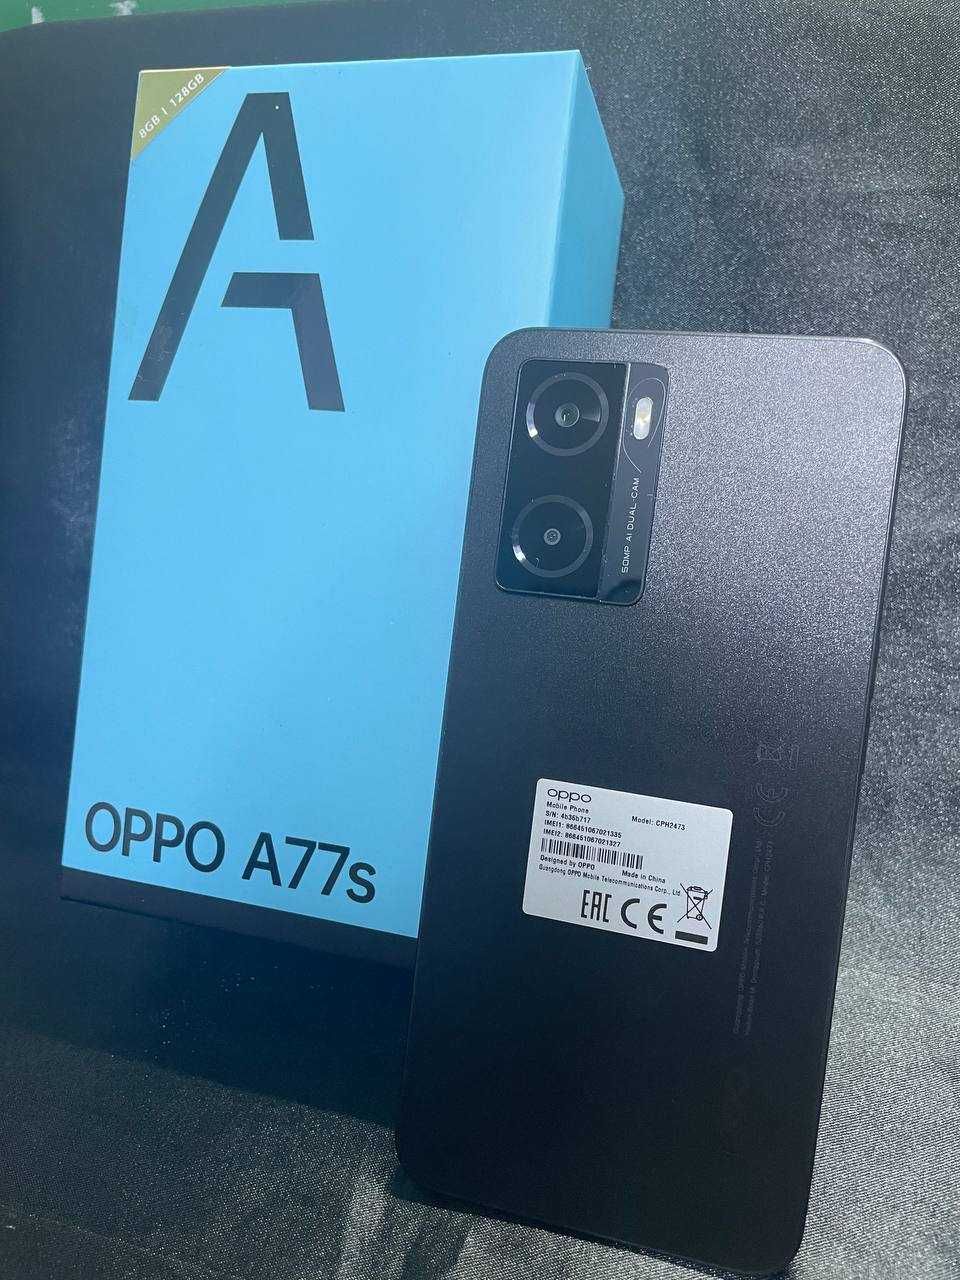 Oppo A77s ( Караганда, г. Абай) лот 335549